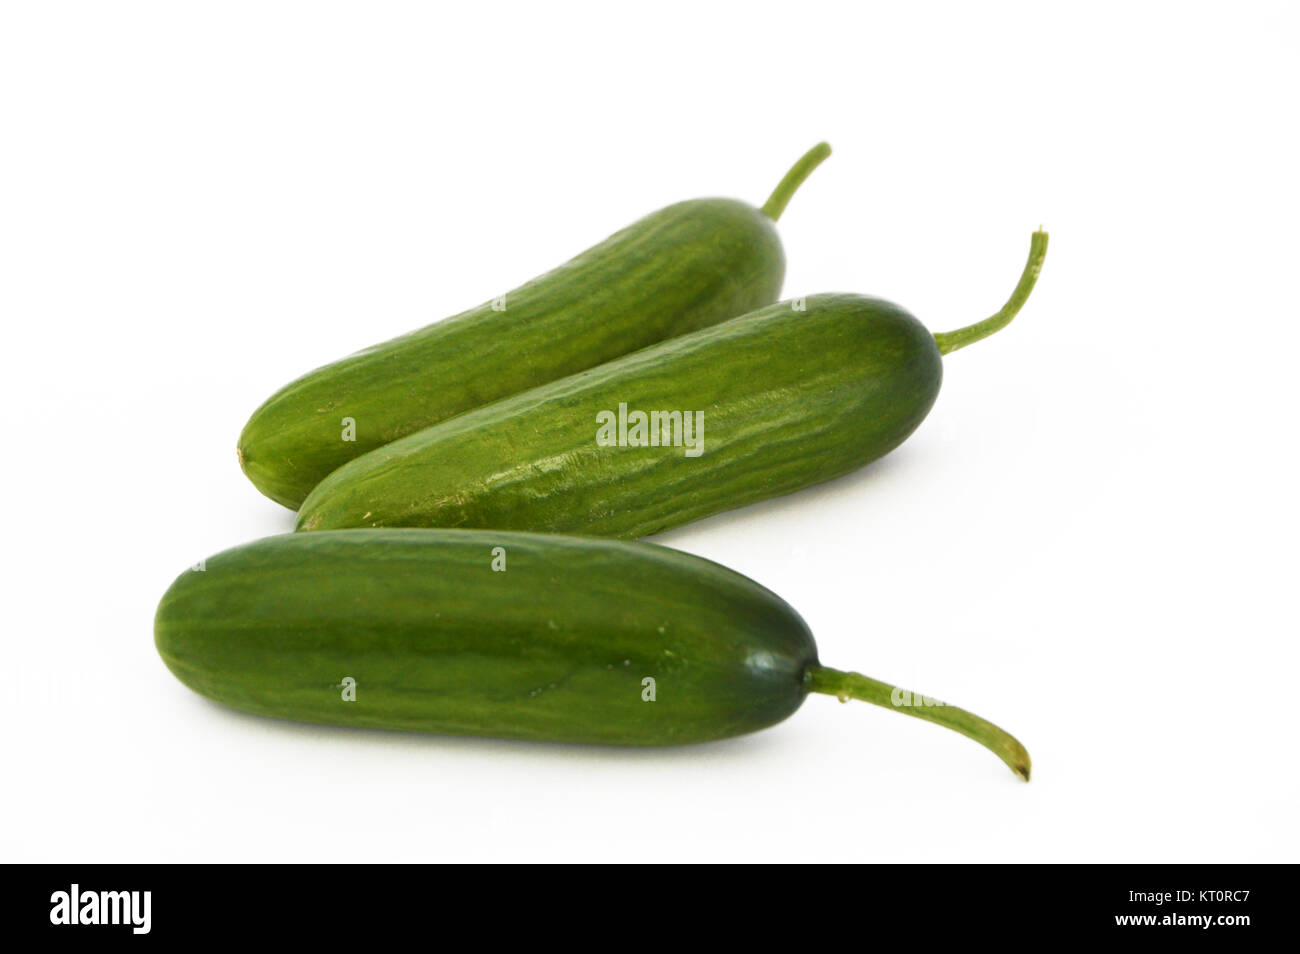 Cucumber pictures Stock Photo